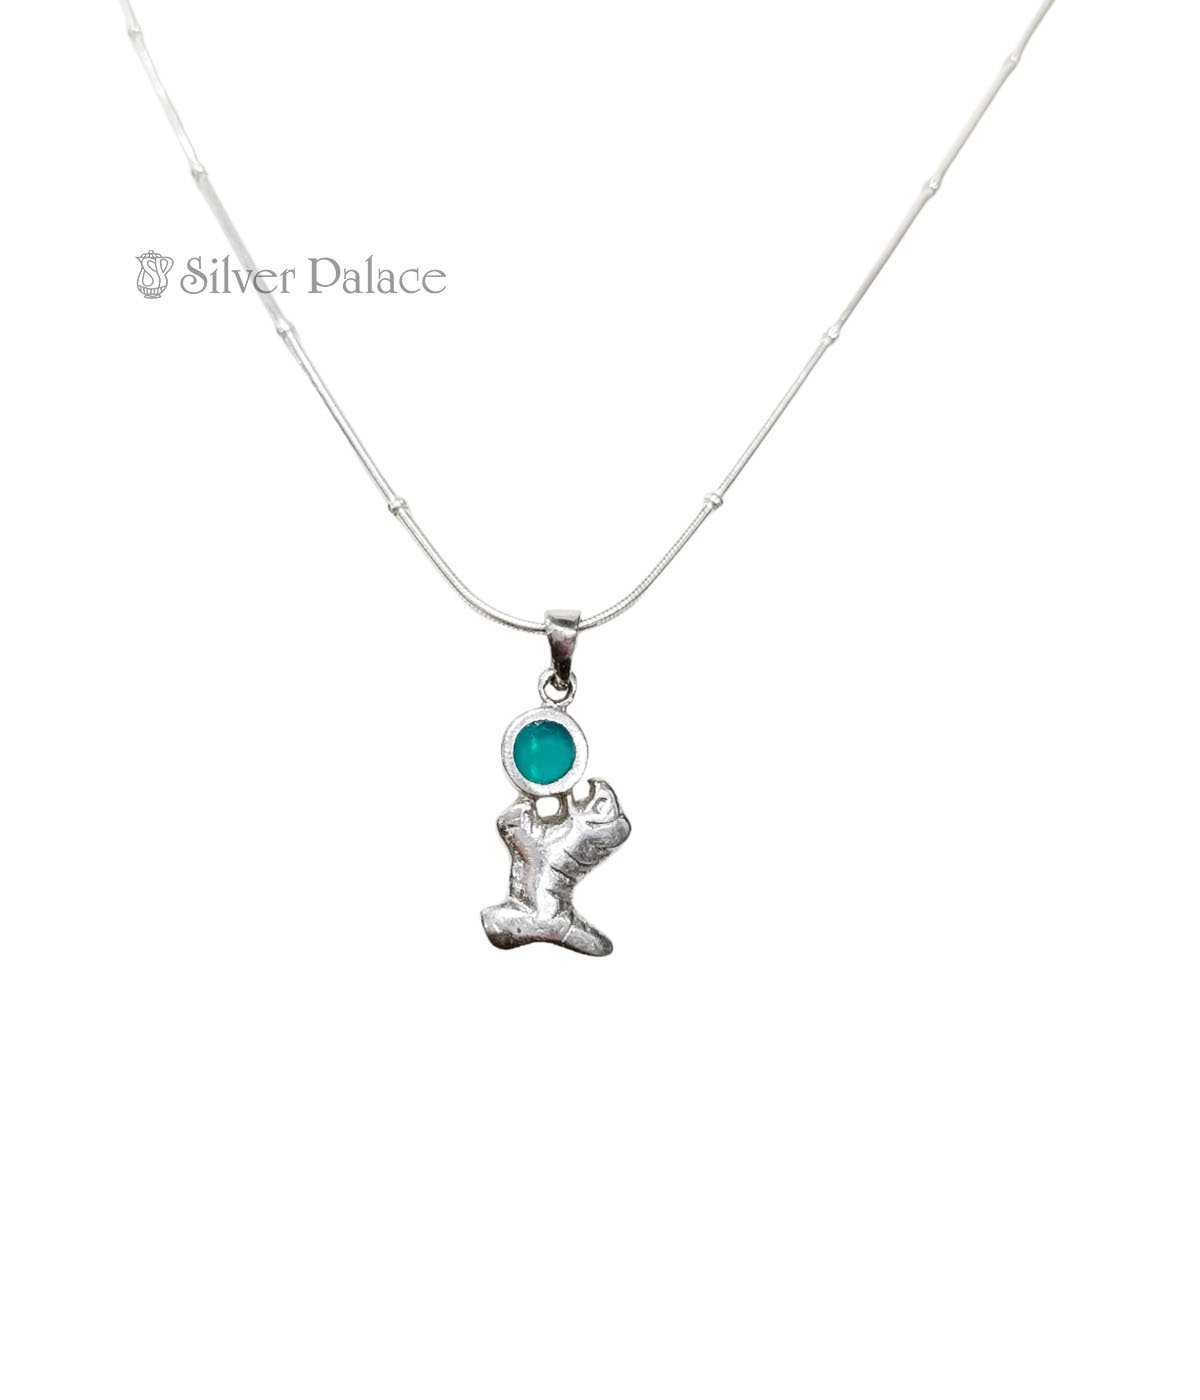 92.5 STERLING SILVER PUPPY WITH BALL PENDANT